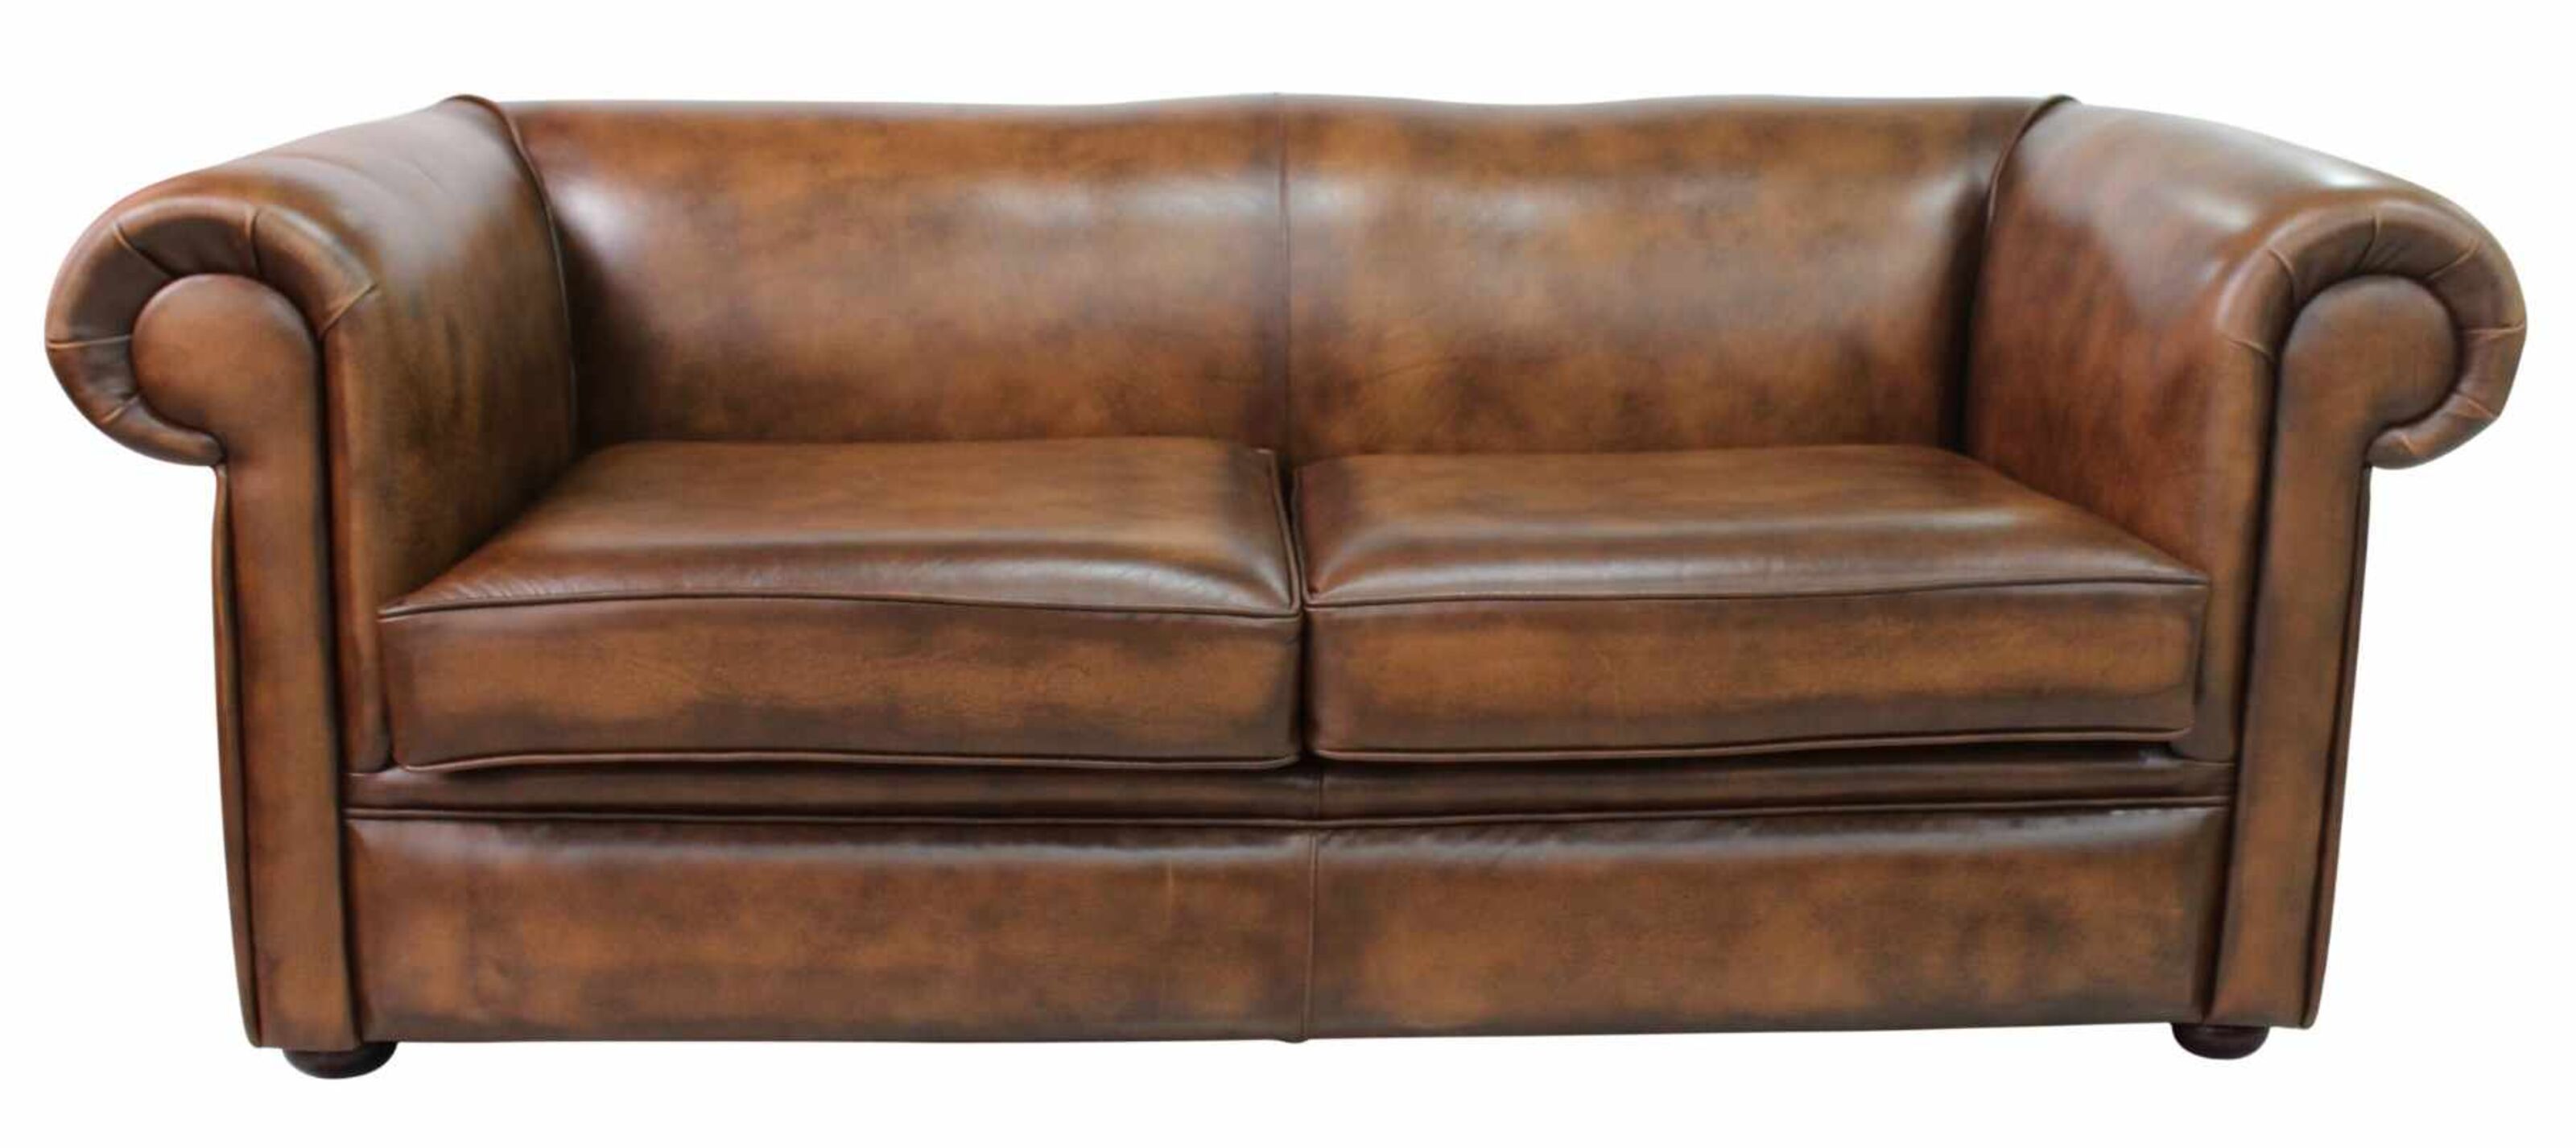 Cushioned Comfort Chesterfield Sofas with Plush Padding  %Post Title